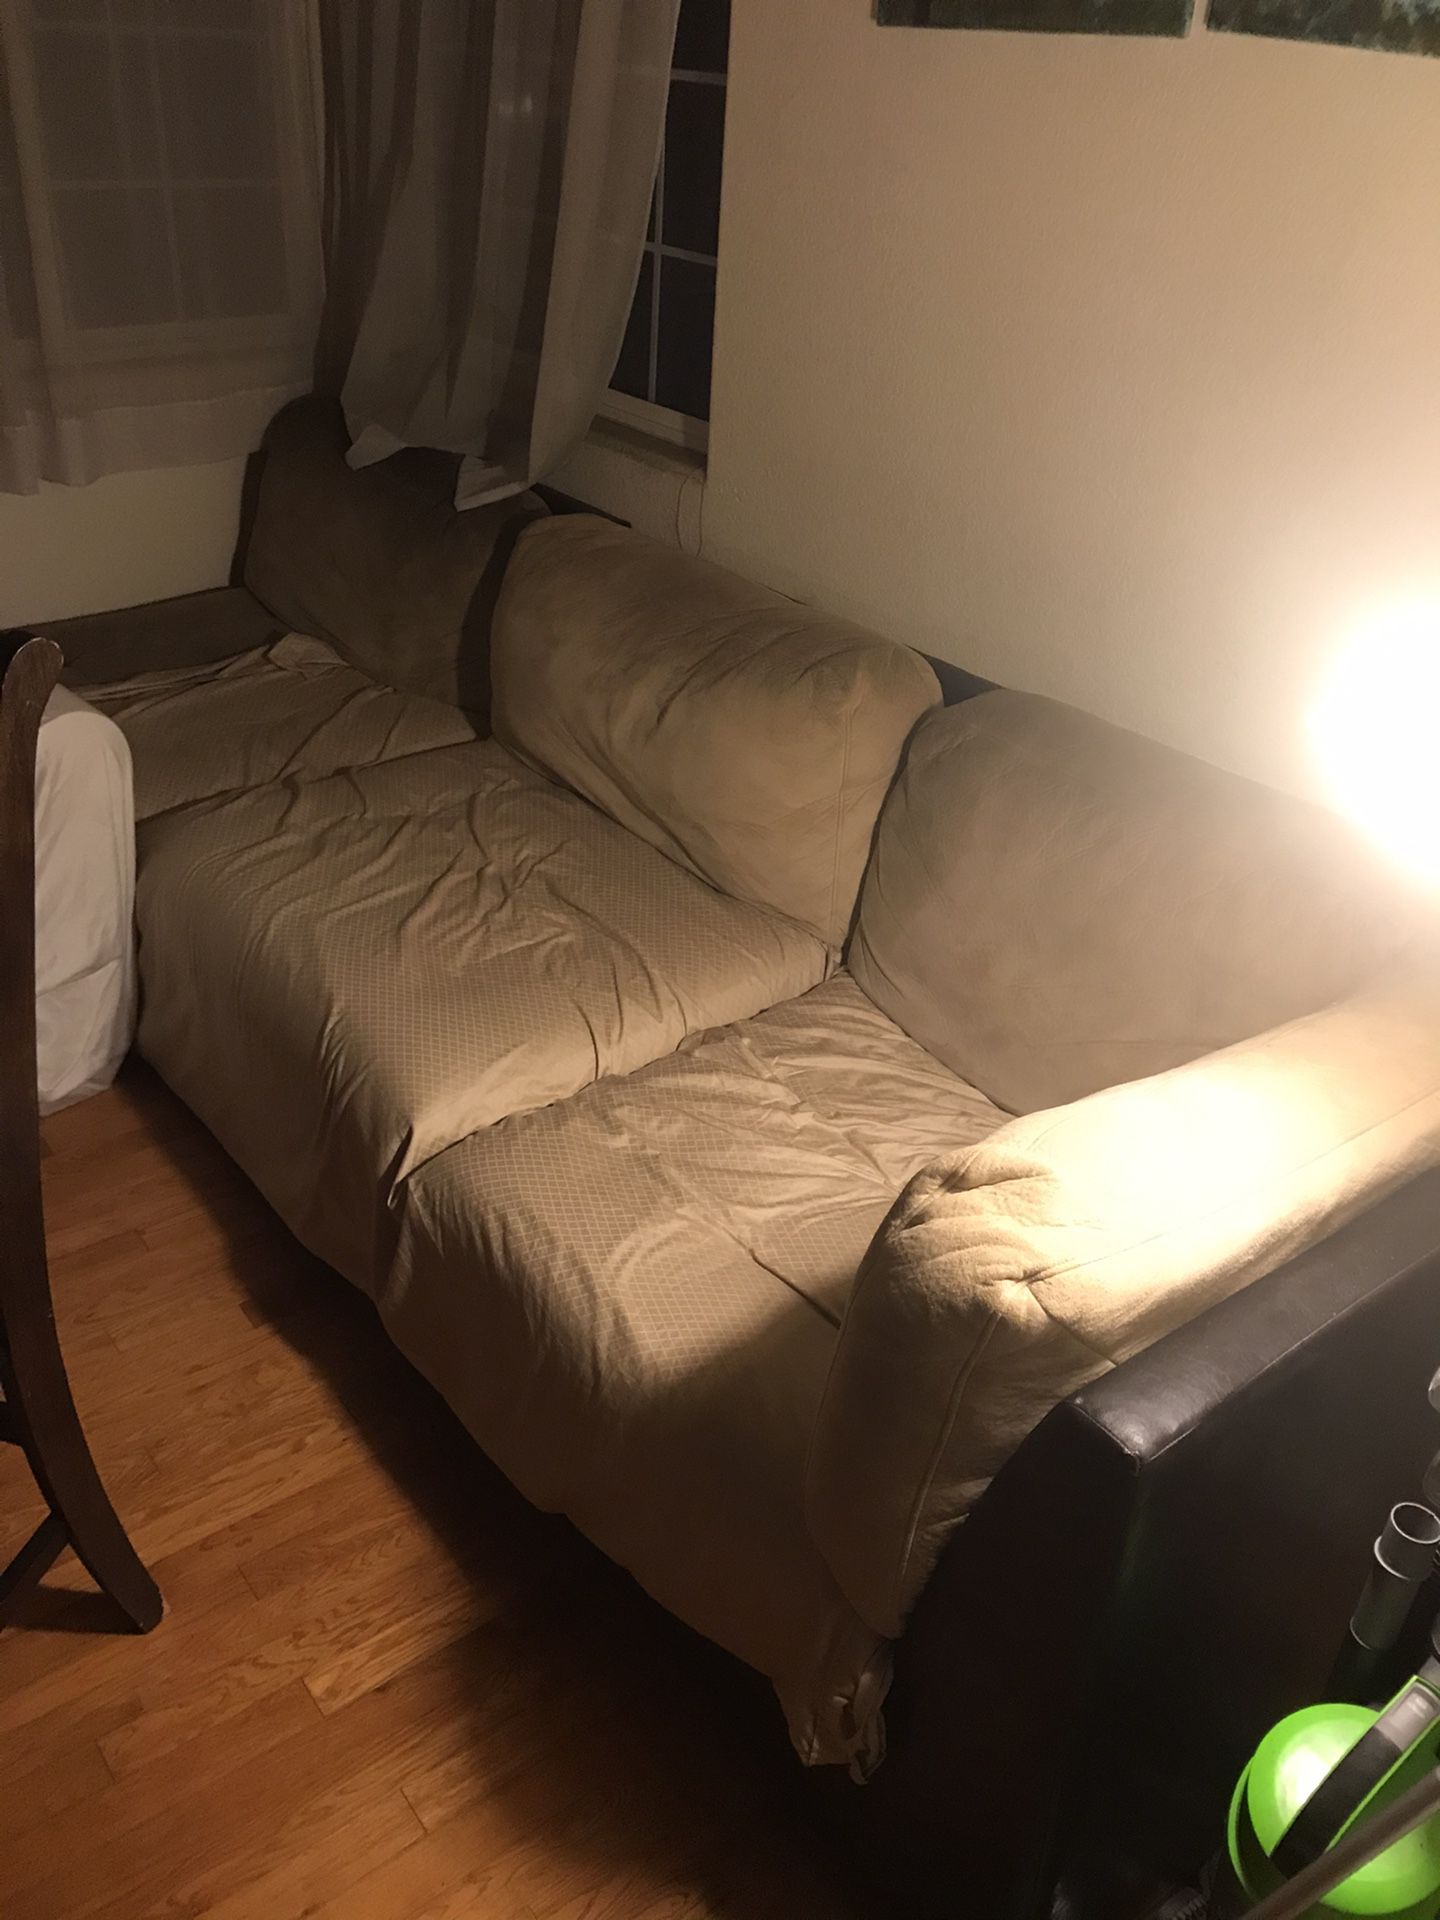 Two sectional couches for sale - $30 OBO